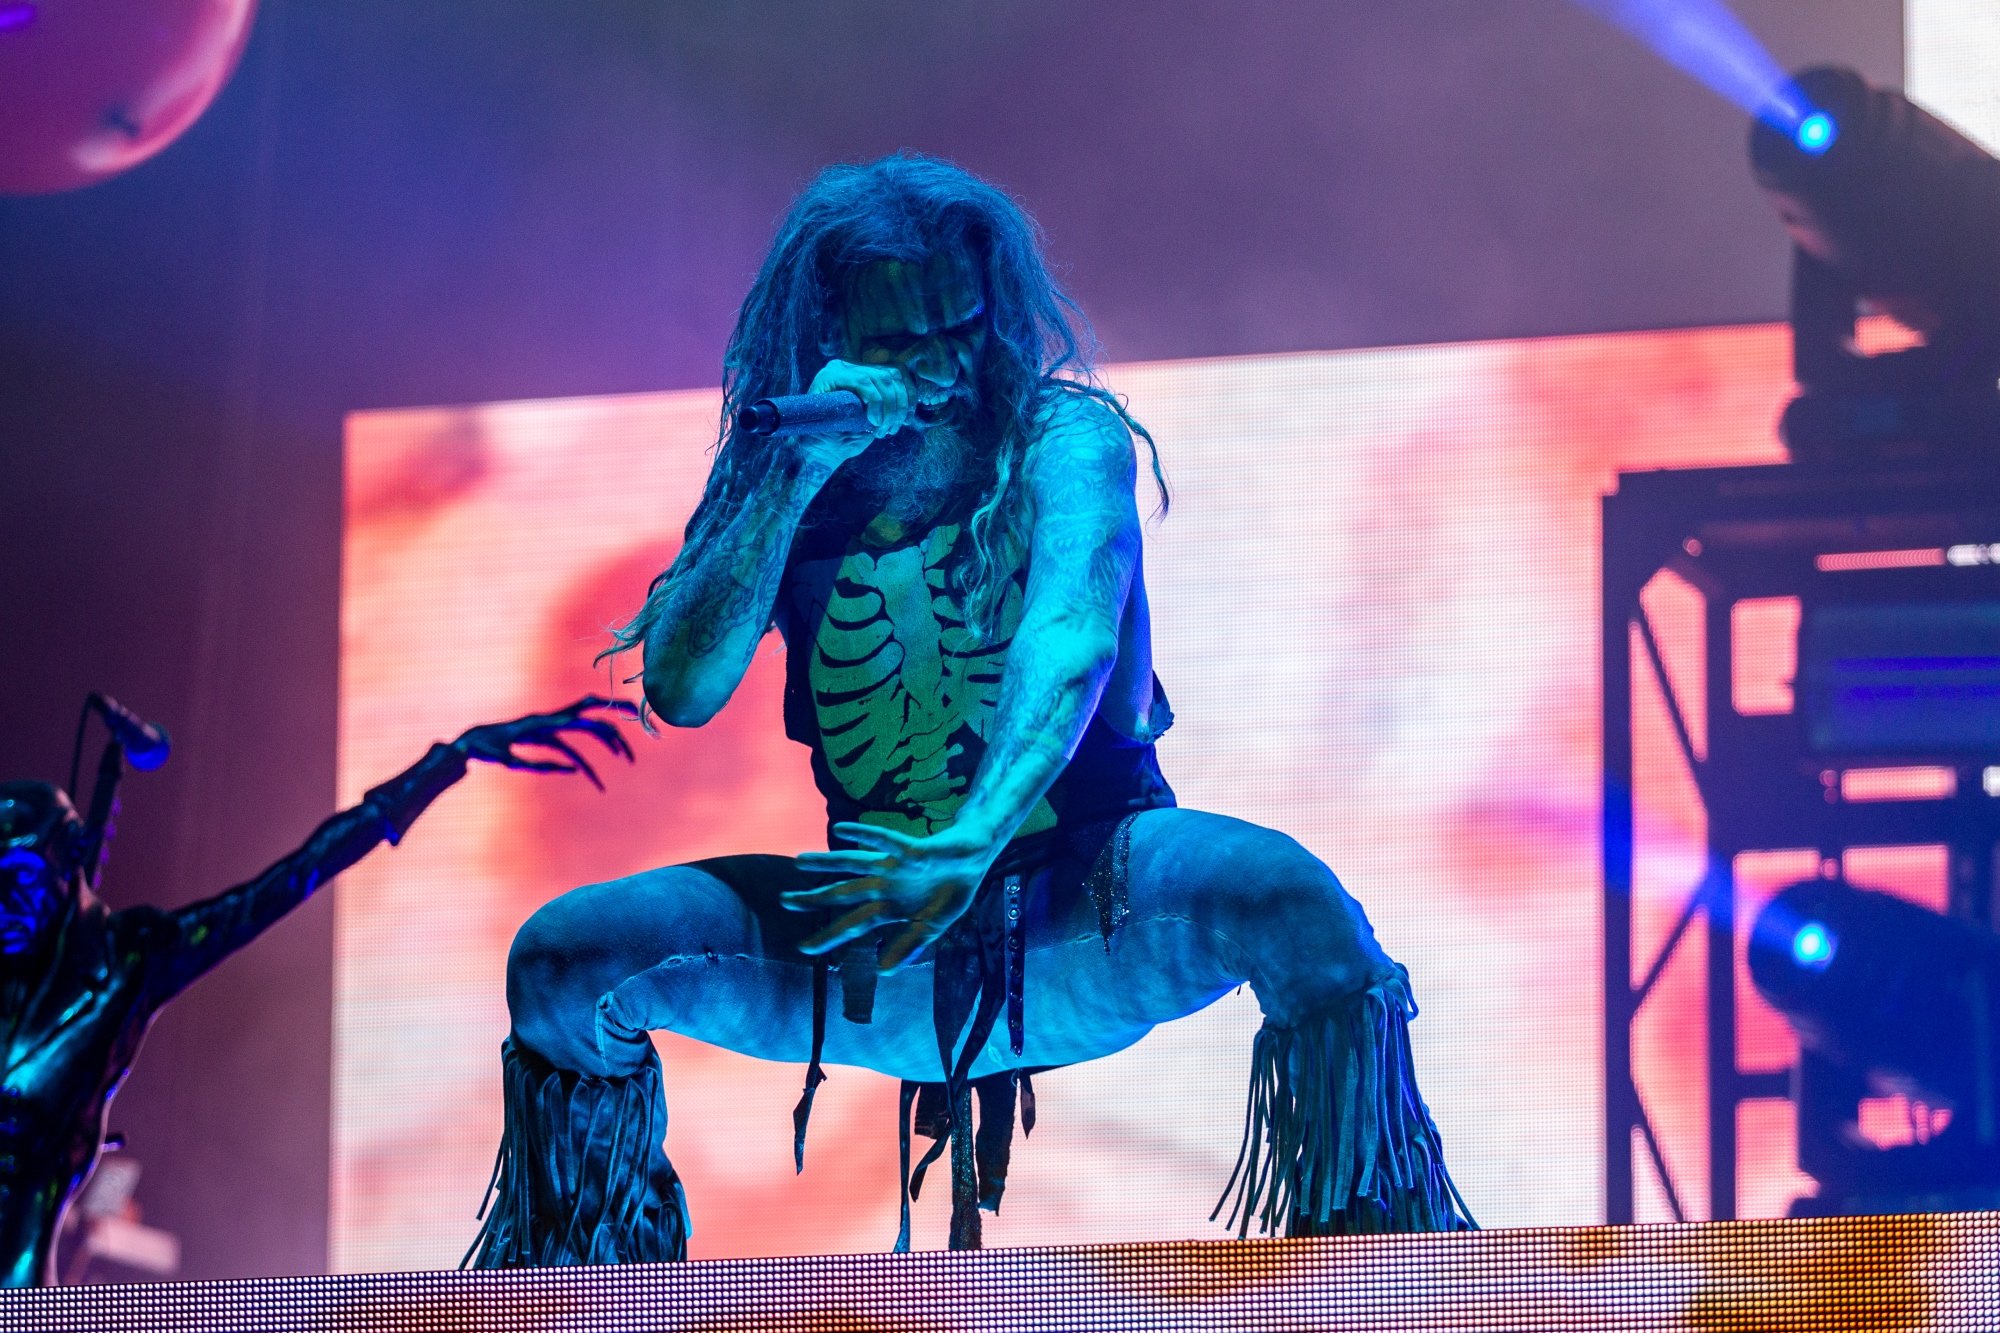 'The Munsters' filmmaker Rob Zombie performing